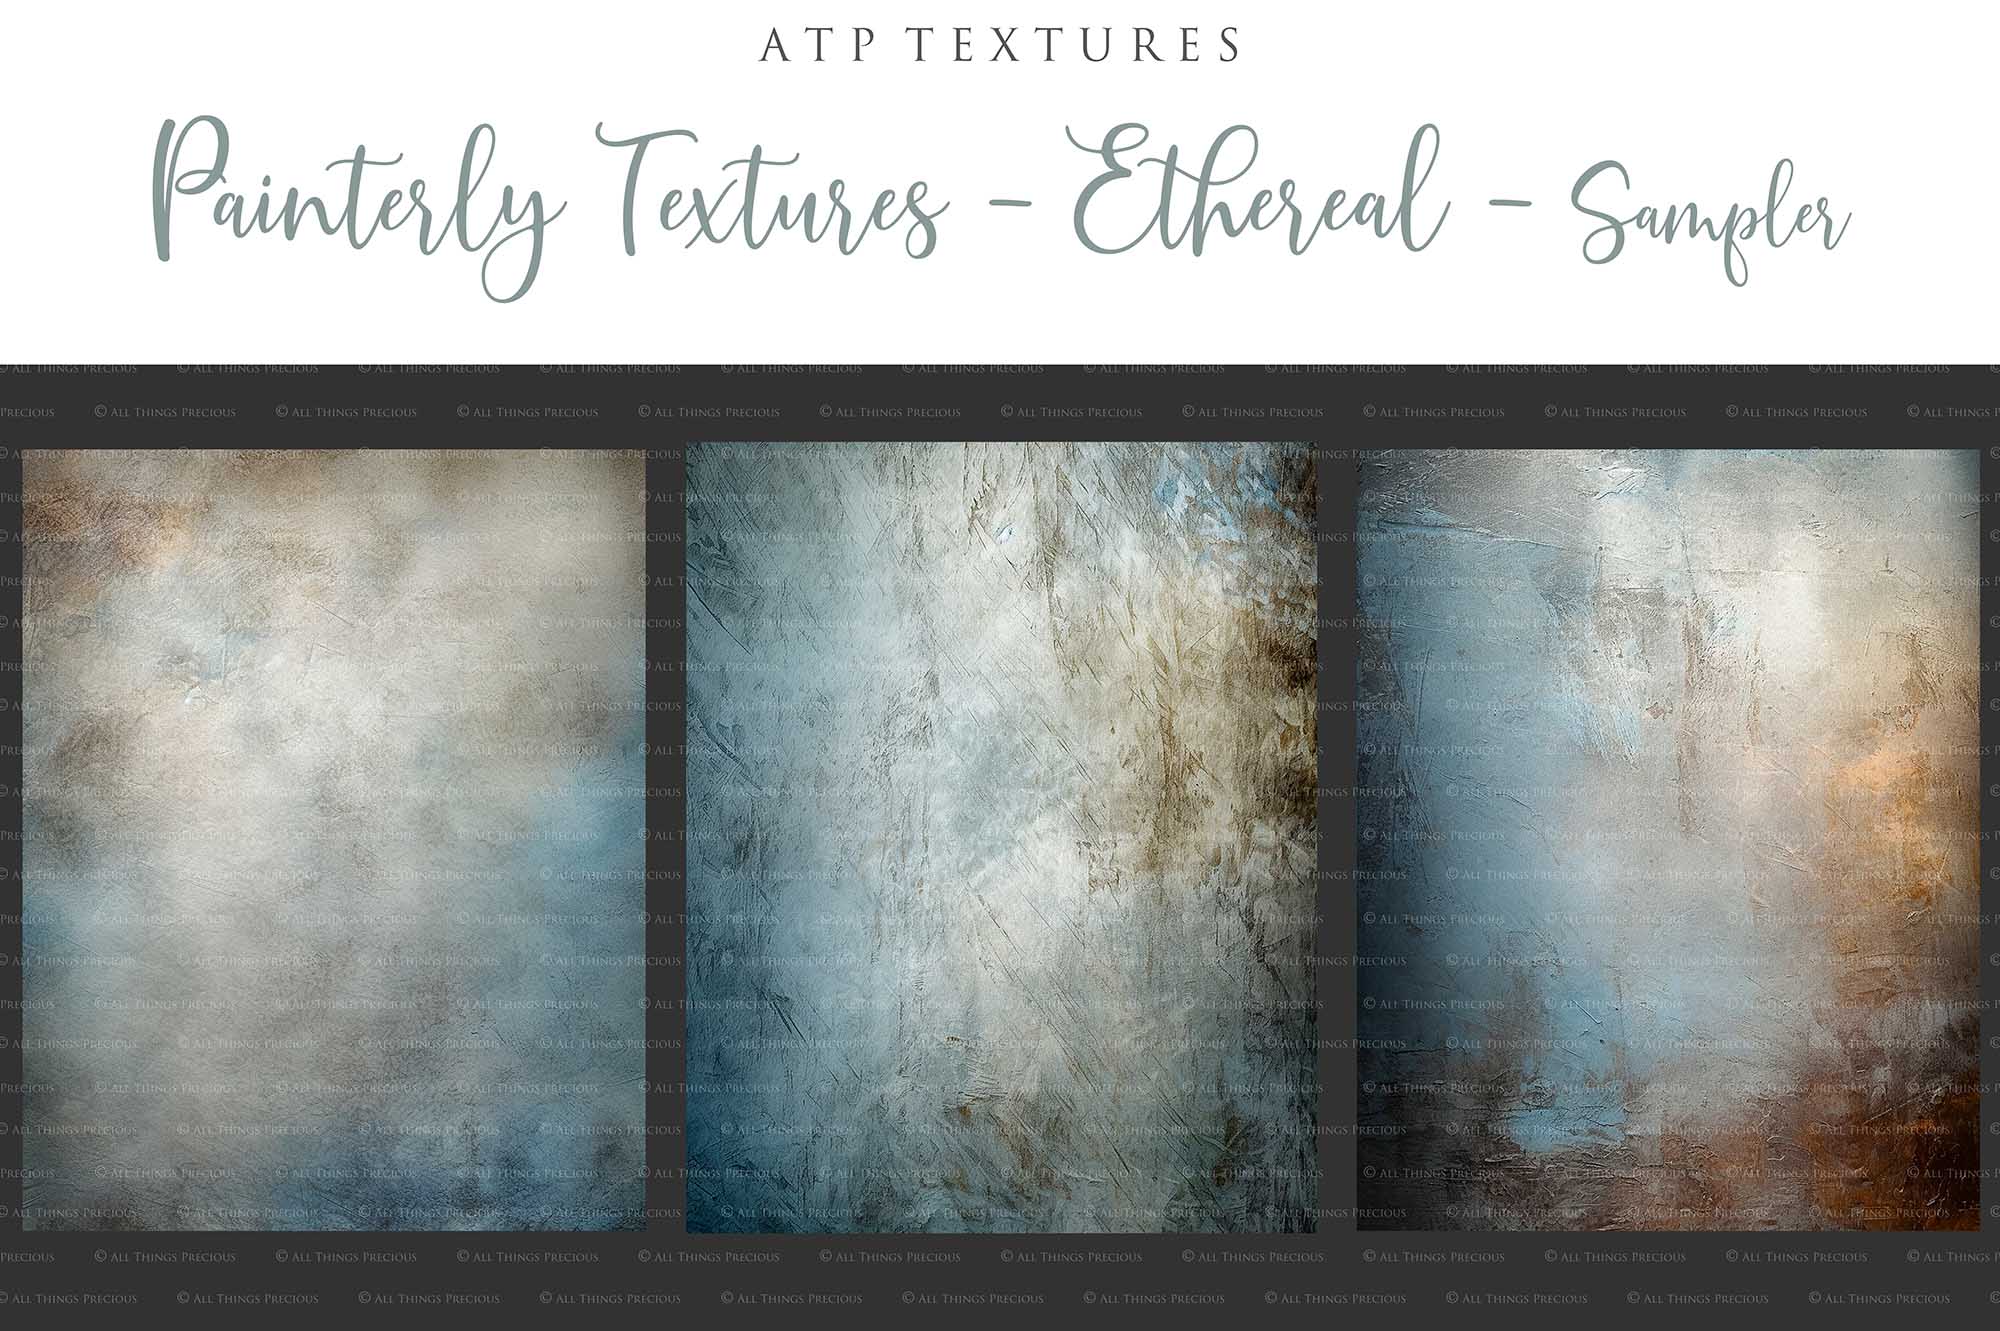 15 Painterly Textures / Digital Backgrounds - ETHEREAL - Set 1